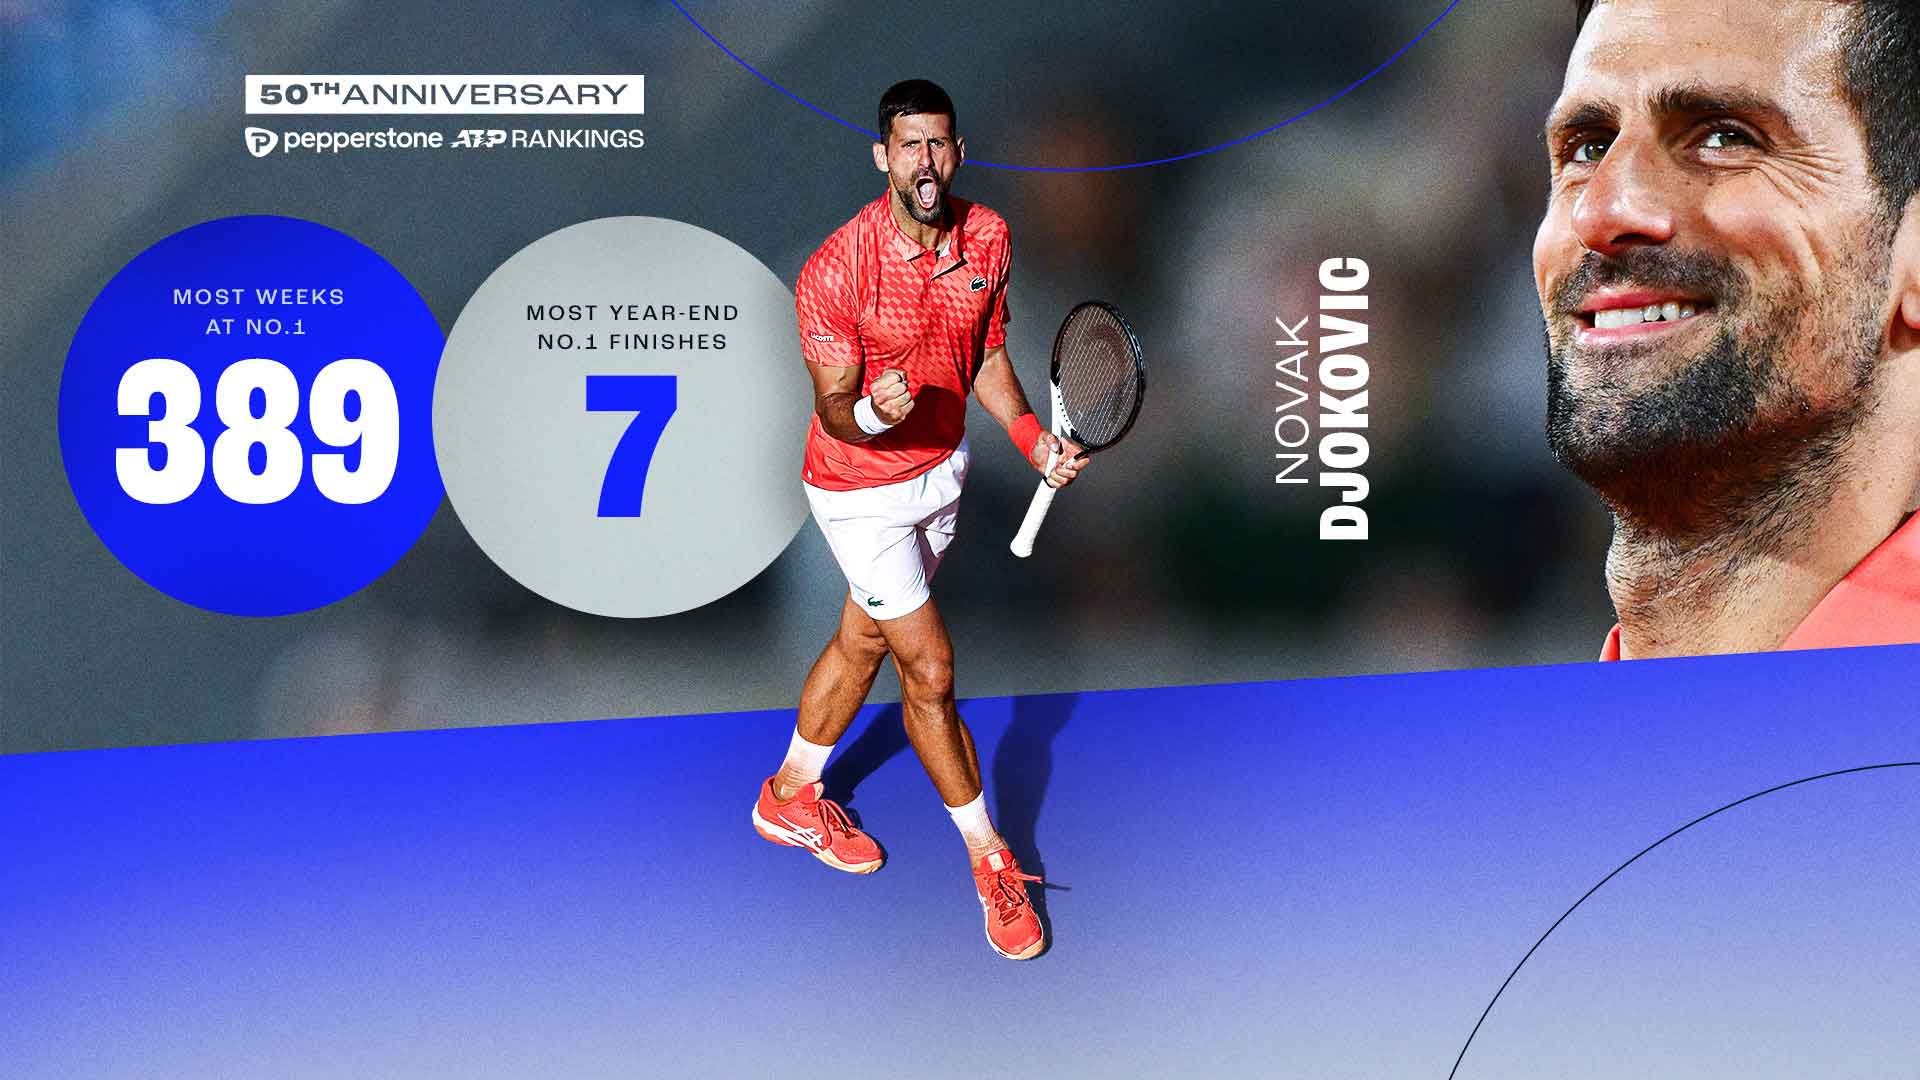 First Among Equals: World No. 1 Record Breakers & Shakers, ATP Tour